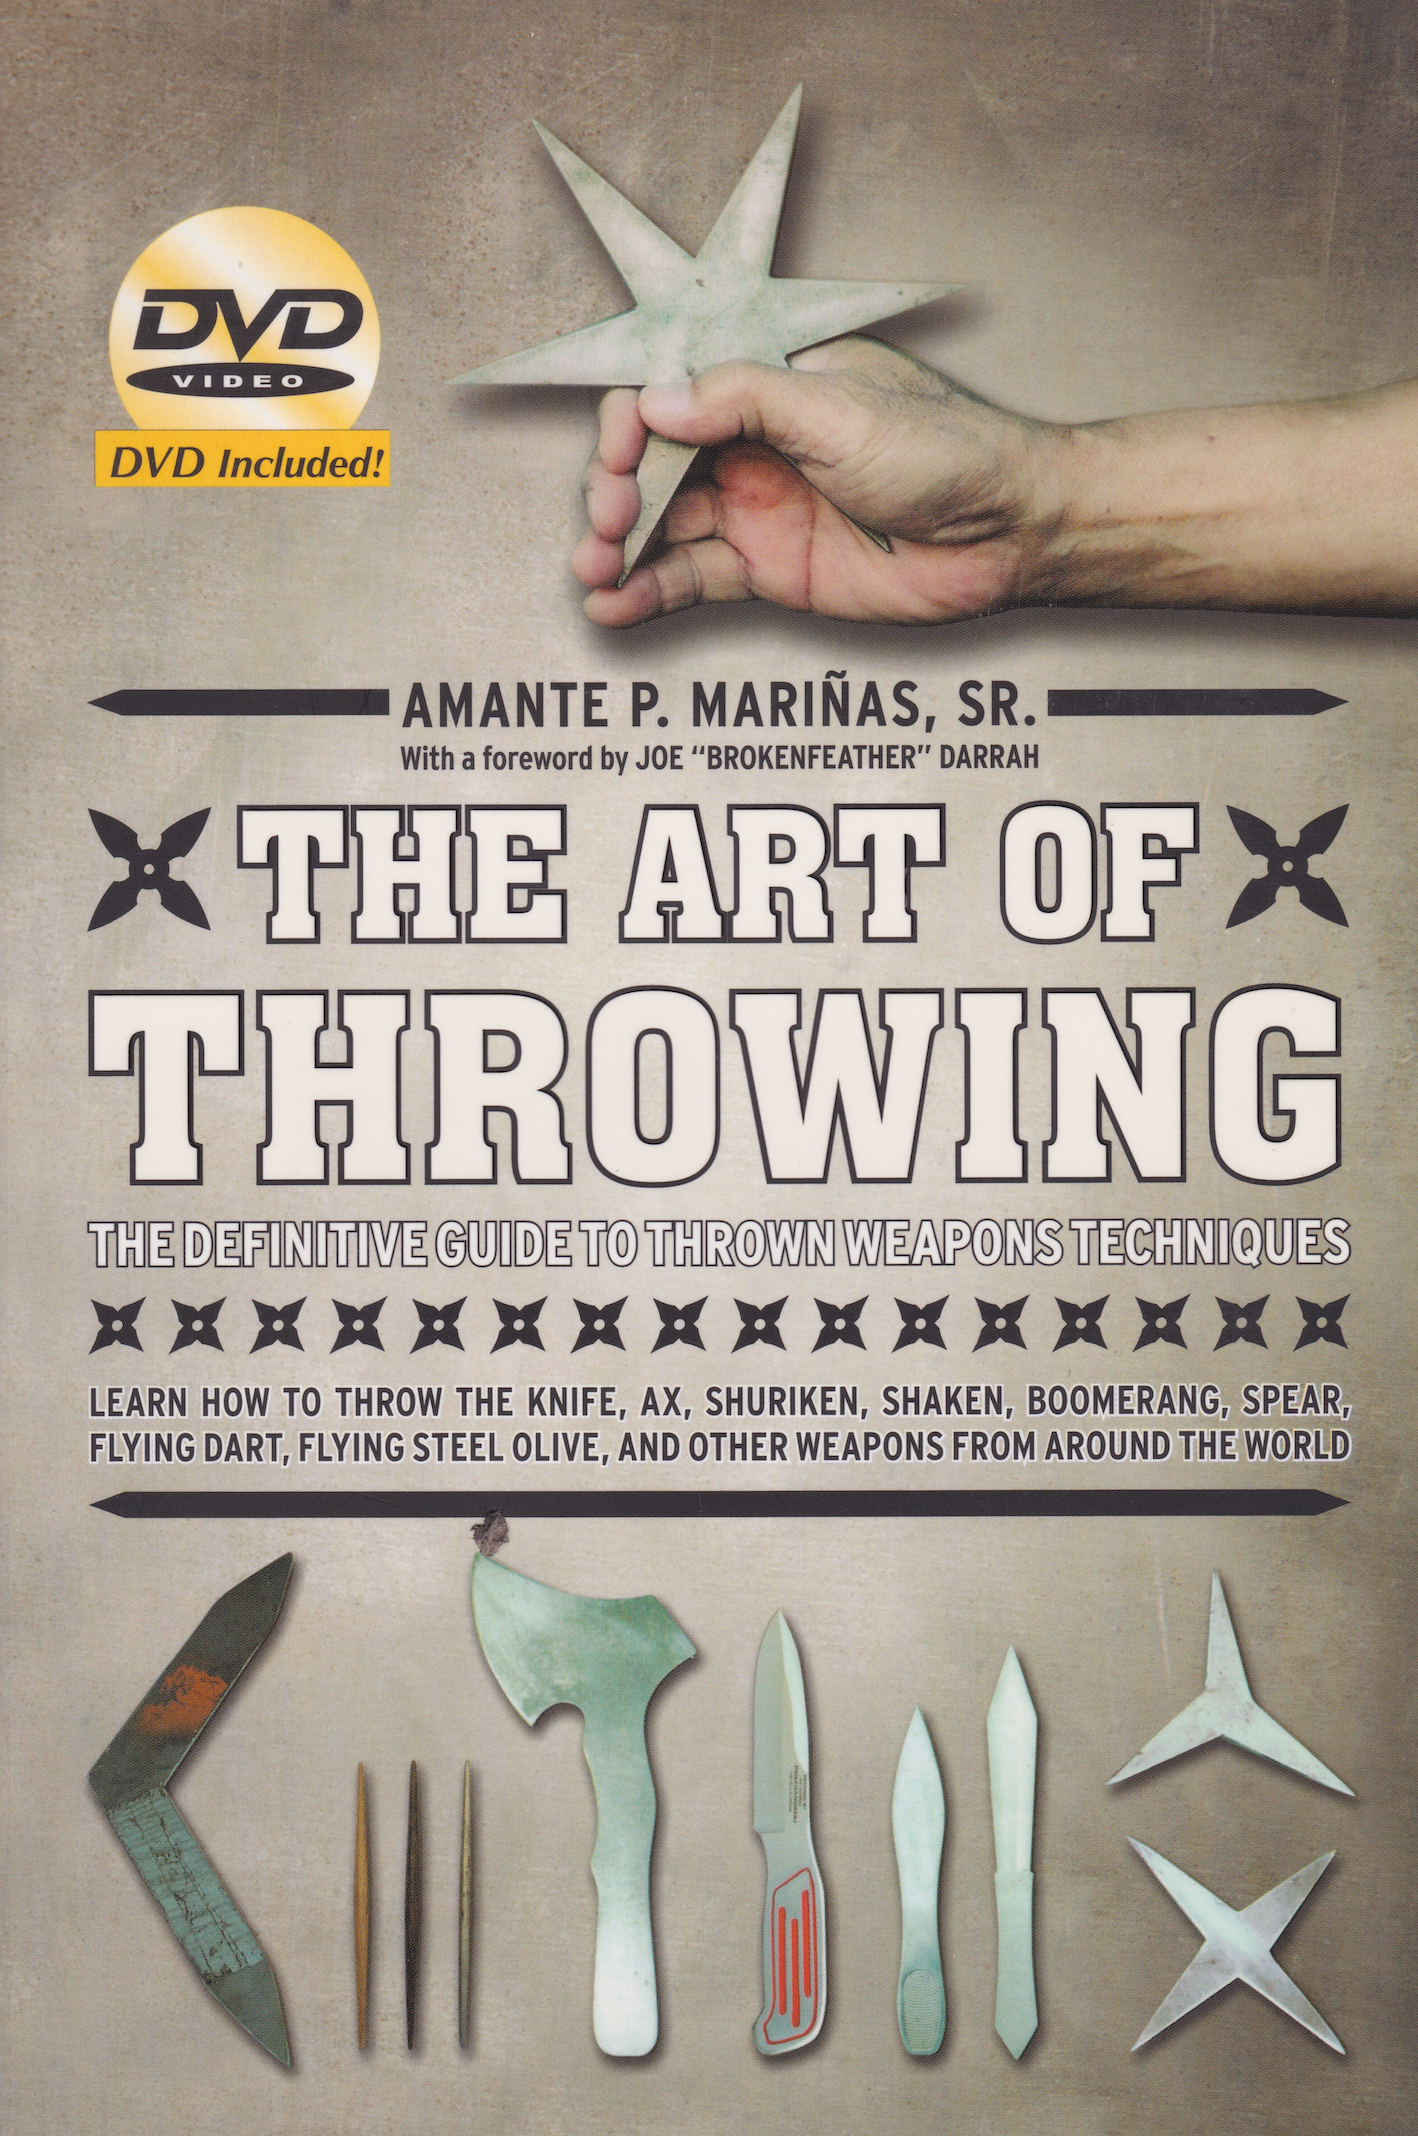 The Art of Throwing: The Definitive Guide to Thrown Weapons Techniques Book & DVD by Amante Marinas Sr (Preowned)